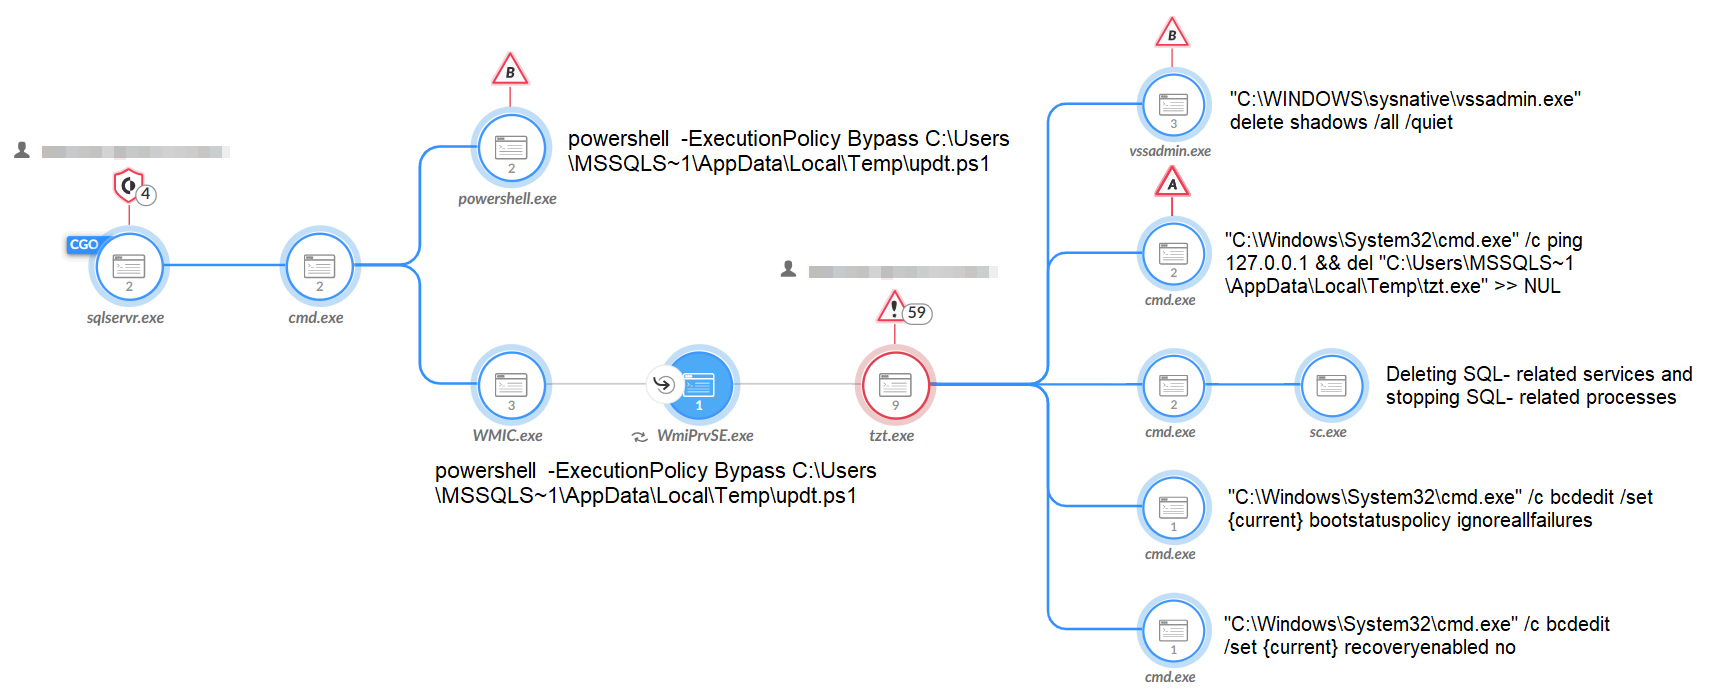 Image 8 is a screenshot of the full process tree of a Mallox ransomware attack in Cortex XDR and XSIAM. The tree splits into five final branches.